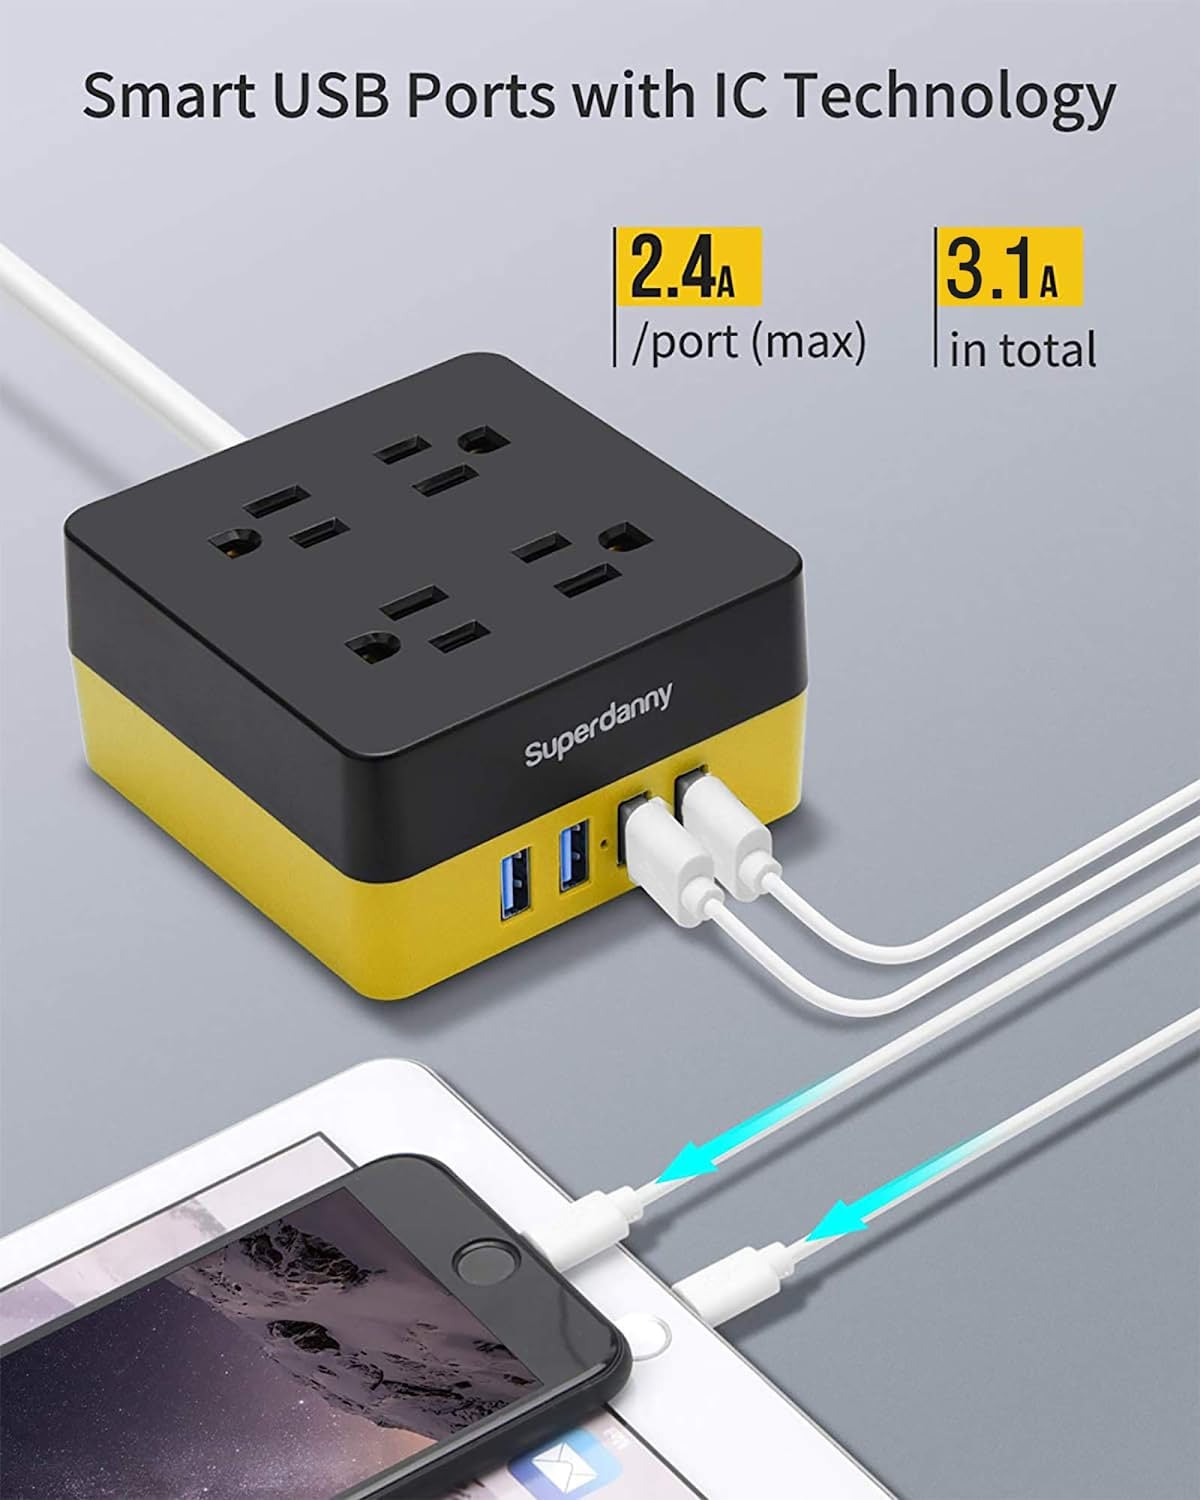 4 Widely Spaced AC Outlets and 4 Smart Charging USB Surge Protector, Desktop Charging Station with Extension Cord for Home, Office, Hotel, Dorm, RV